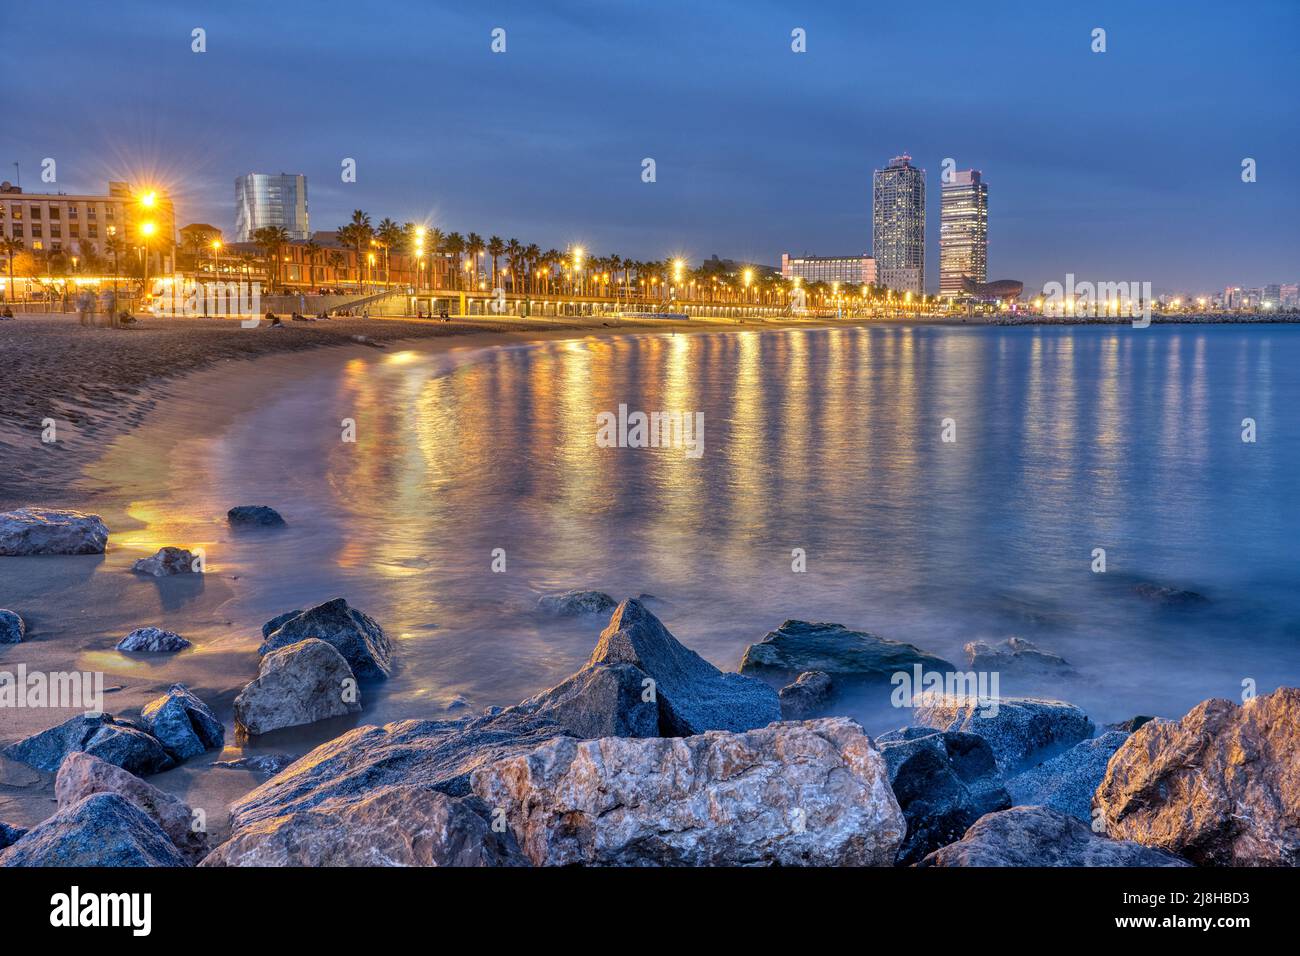 The beach of Barcelona in Spain at night Stock Photo